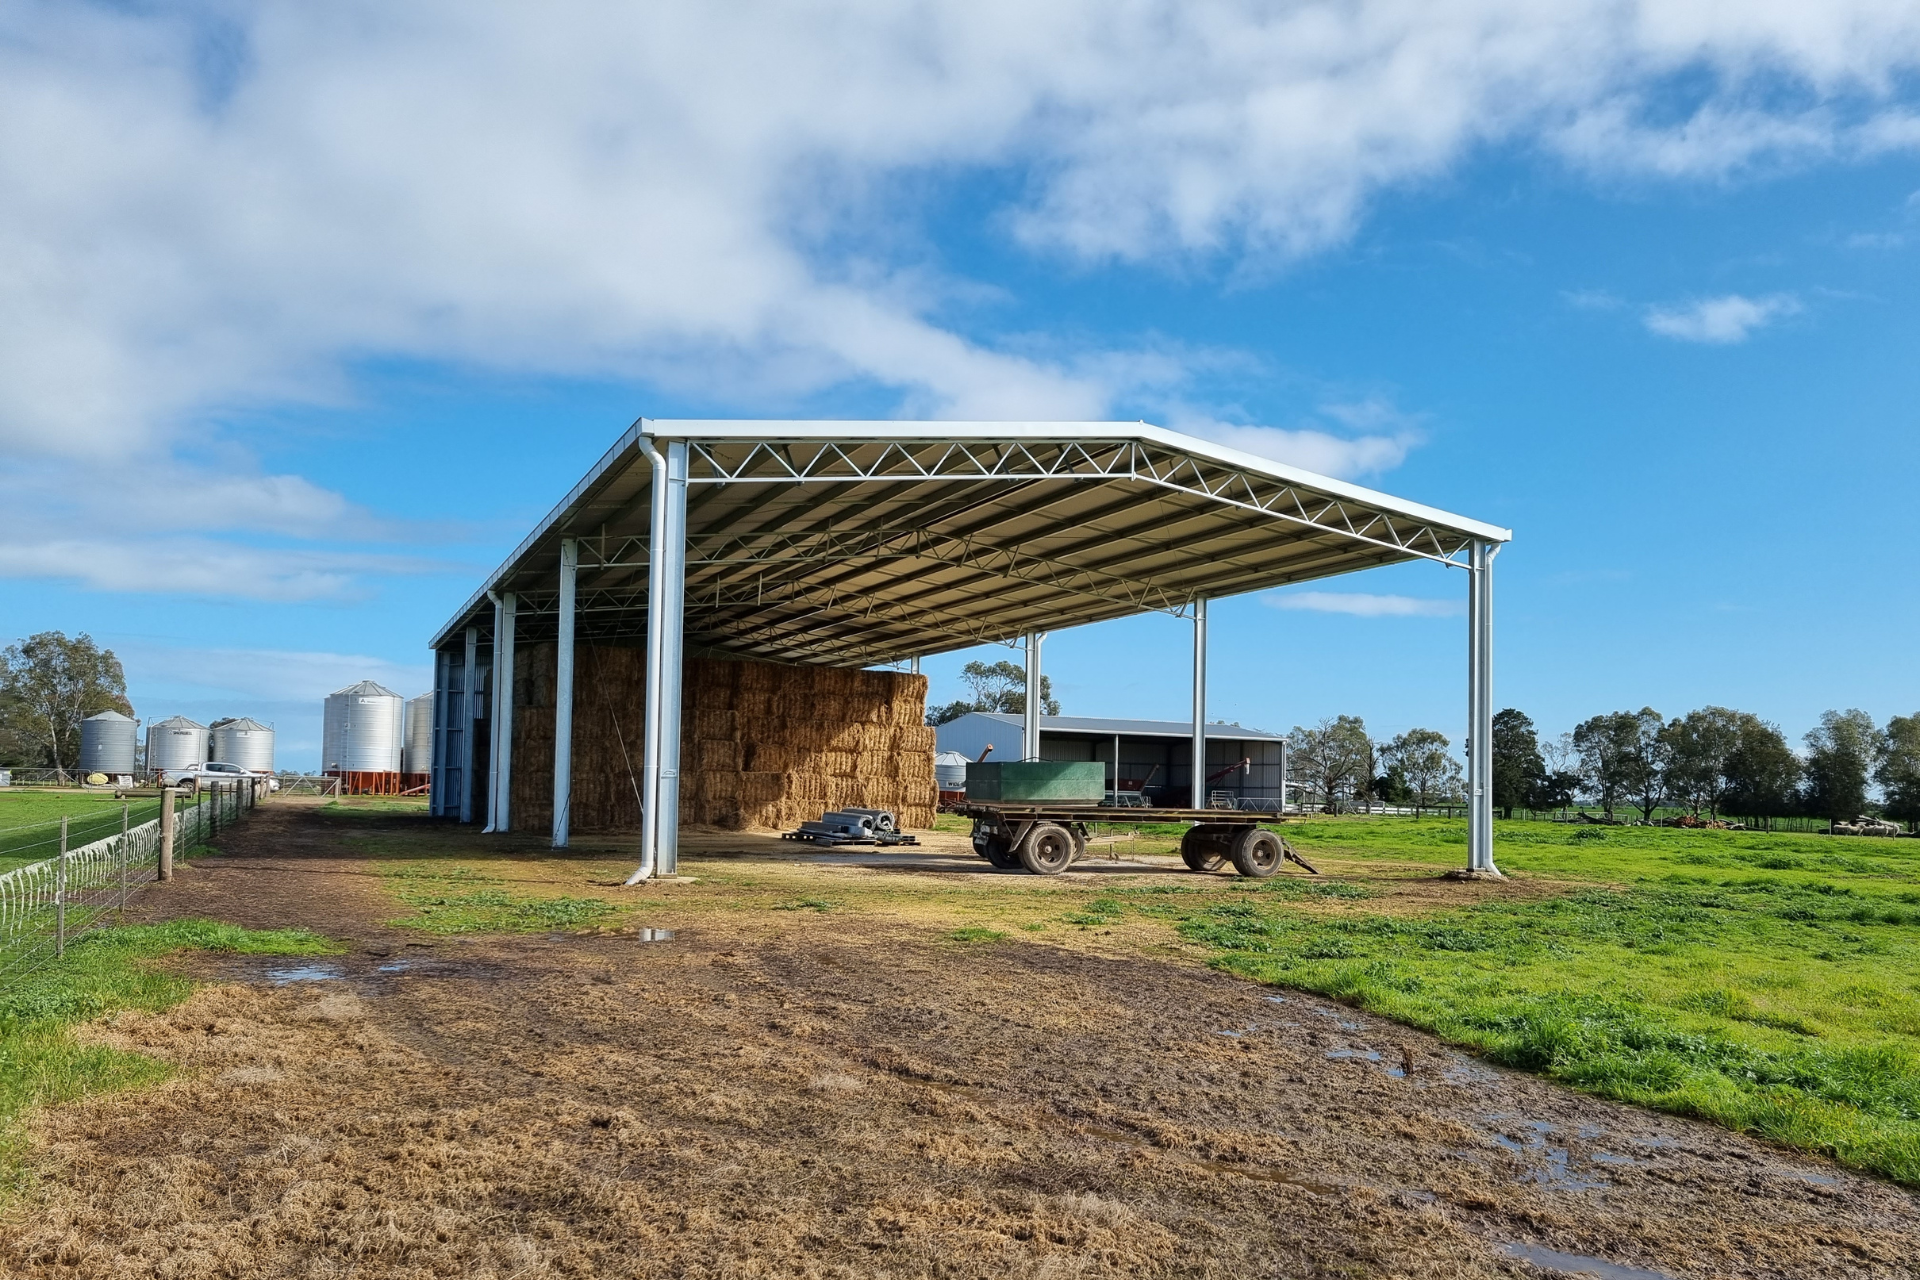 A 36m x 15m x 6m one sided hay shed at Neuarpurr